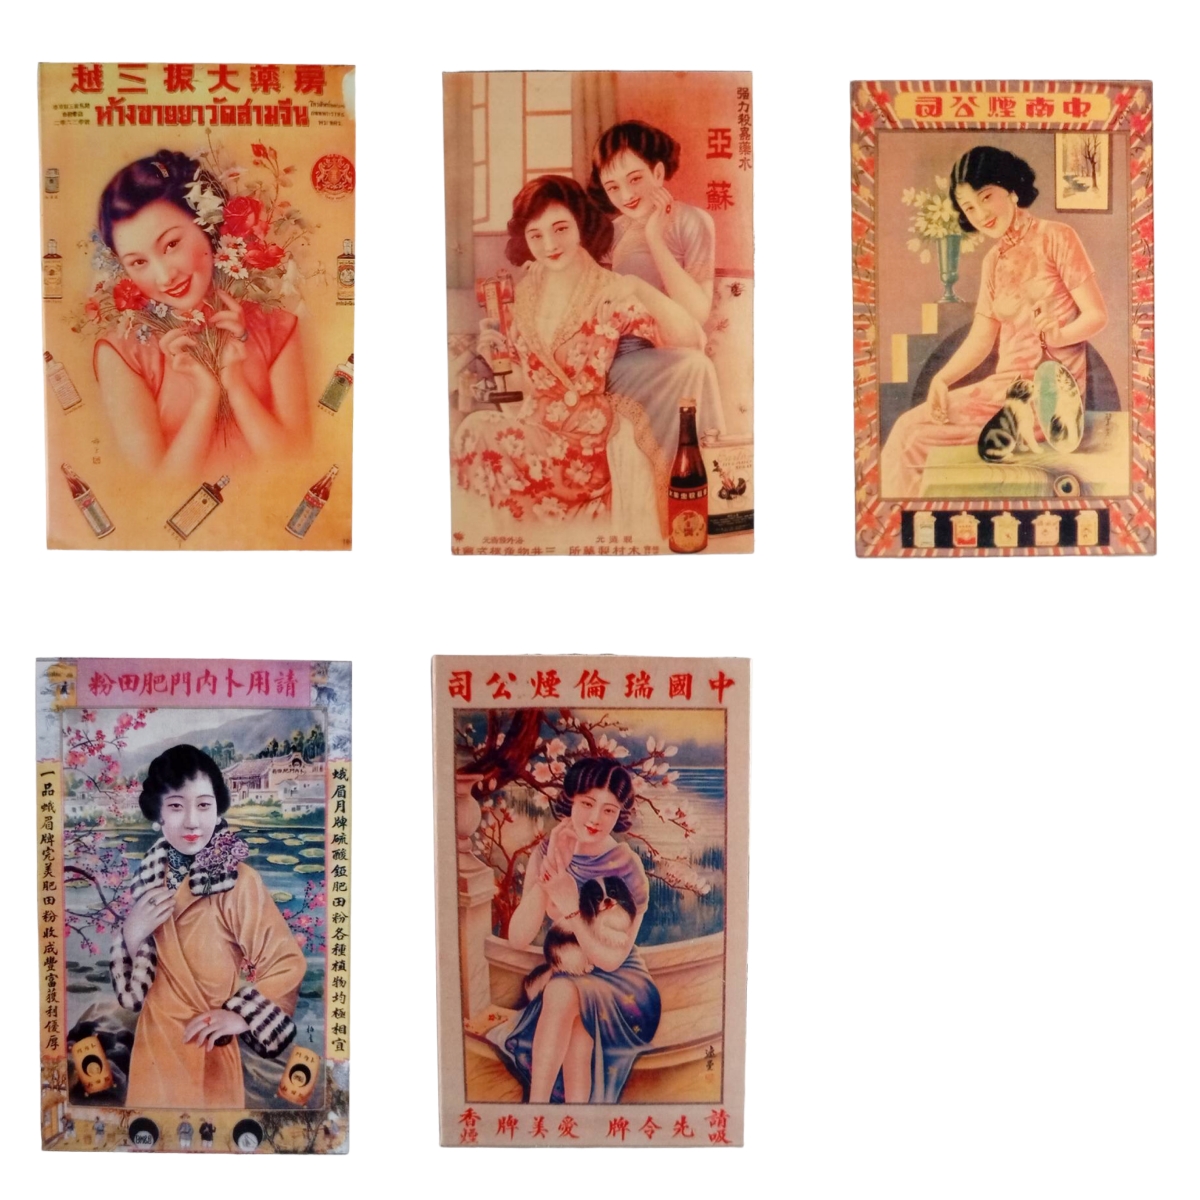 Check out Refrigerator Magnets Chinese Woman Vintage Advertising Poster Art Style Set 5 pc #VintageFridgeMagnets #ChineseWomanArt #AdvertisingPosterStyle #MagnetsForAllOccasions #FridgeGoals ebay.com/itm/2764609021… #eBay via @eBay